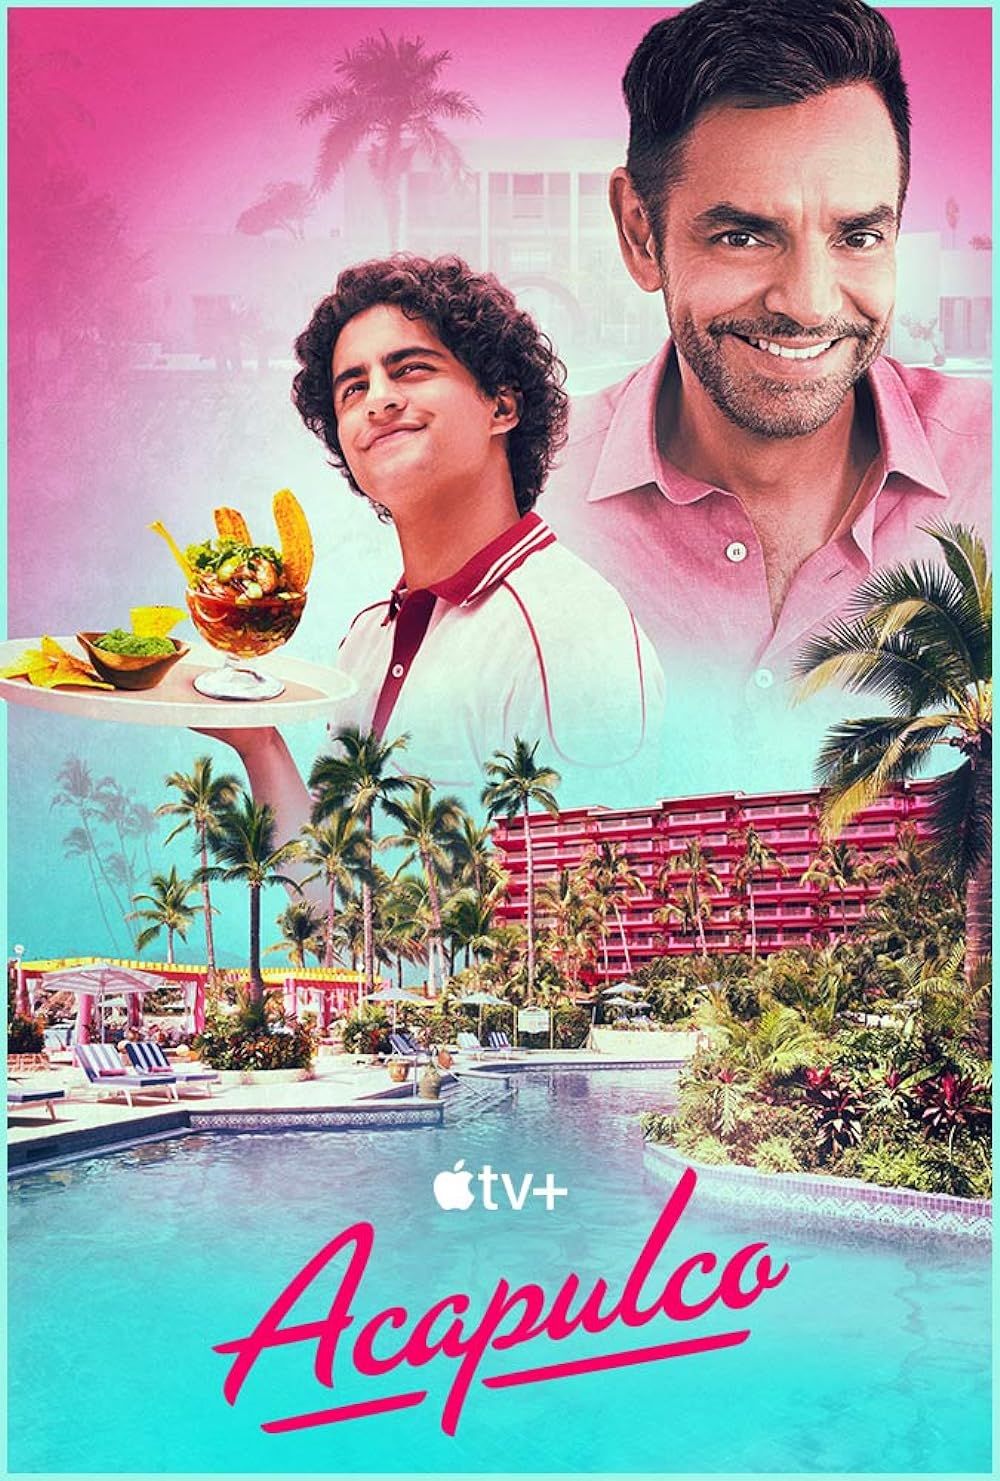 Season 1 poster for Acapulco featuring Eugenio Derbez over a pink tropical resort